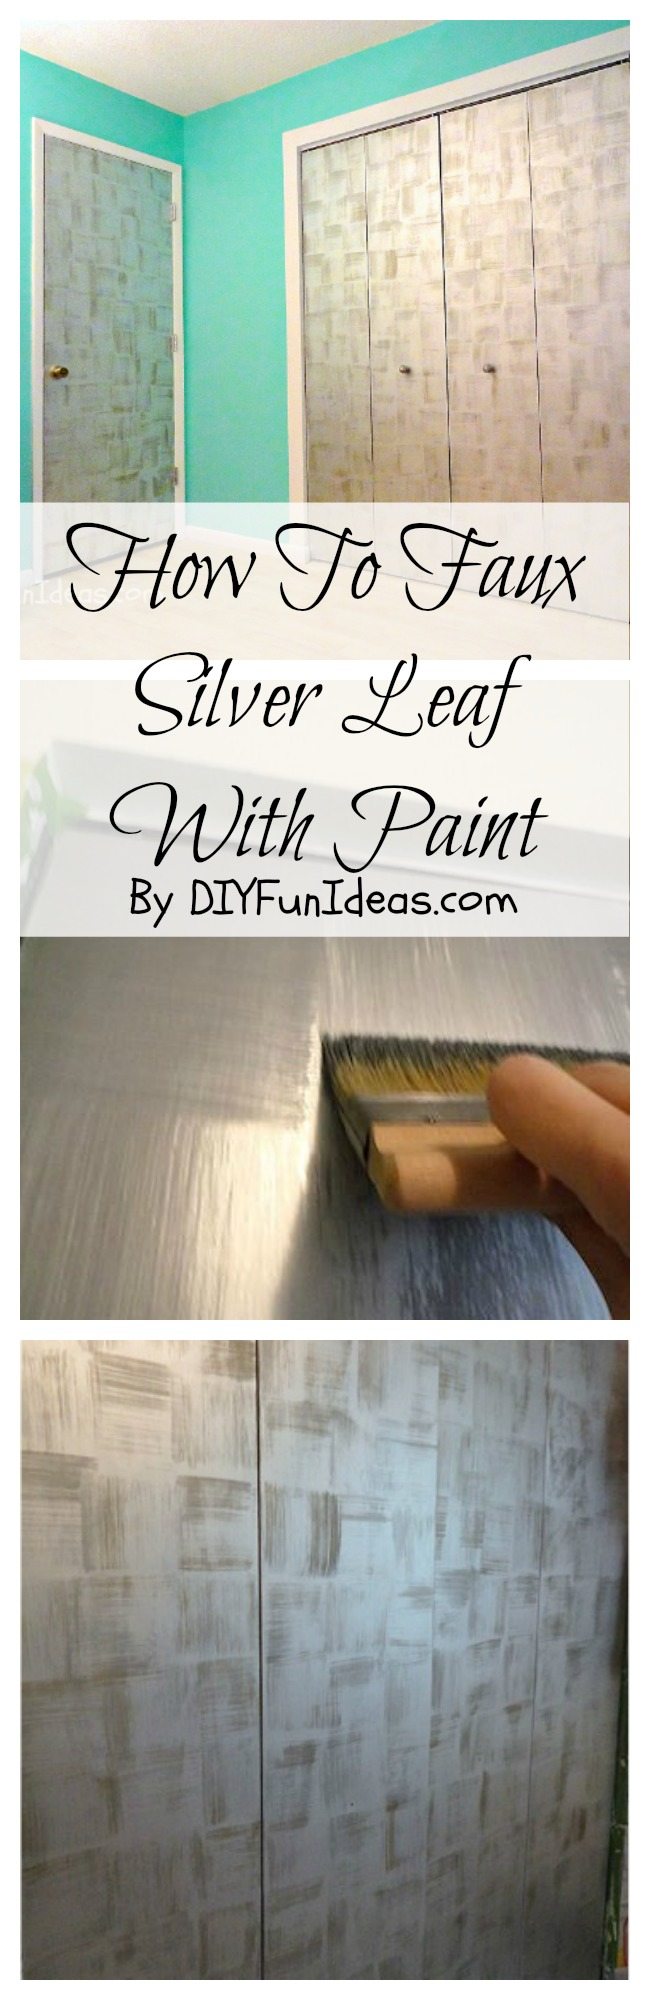 How to faux silver leaf with paint2